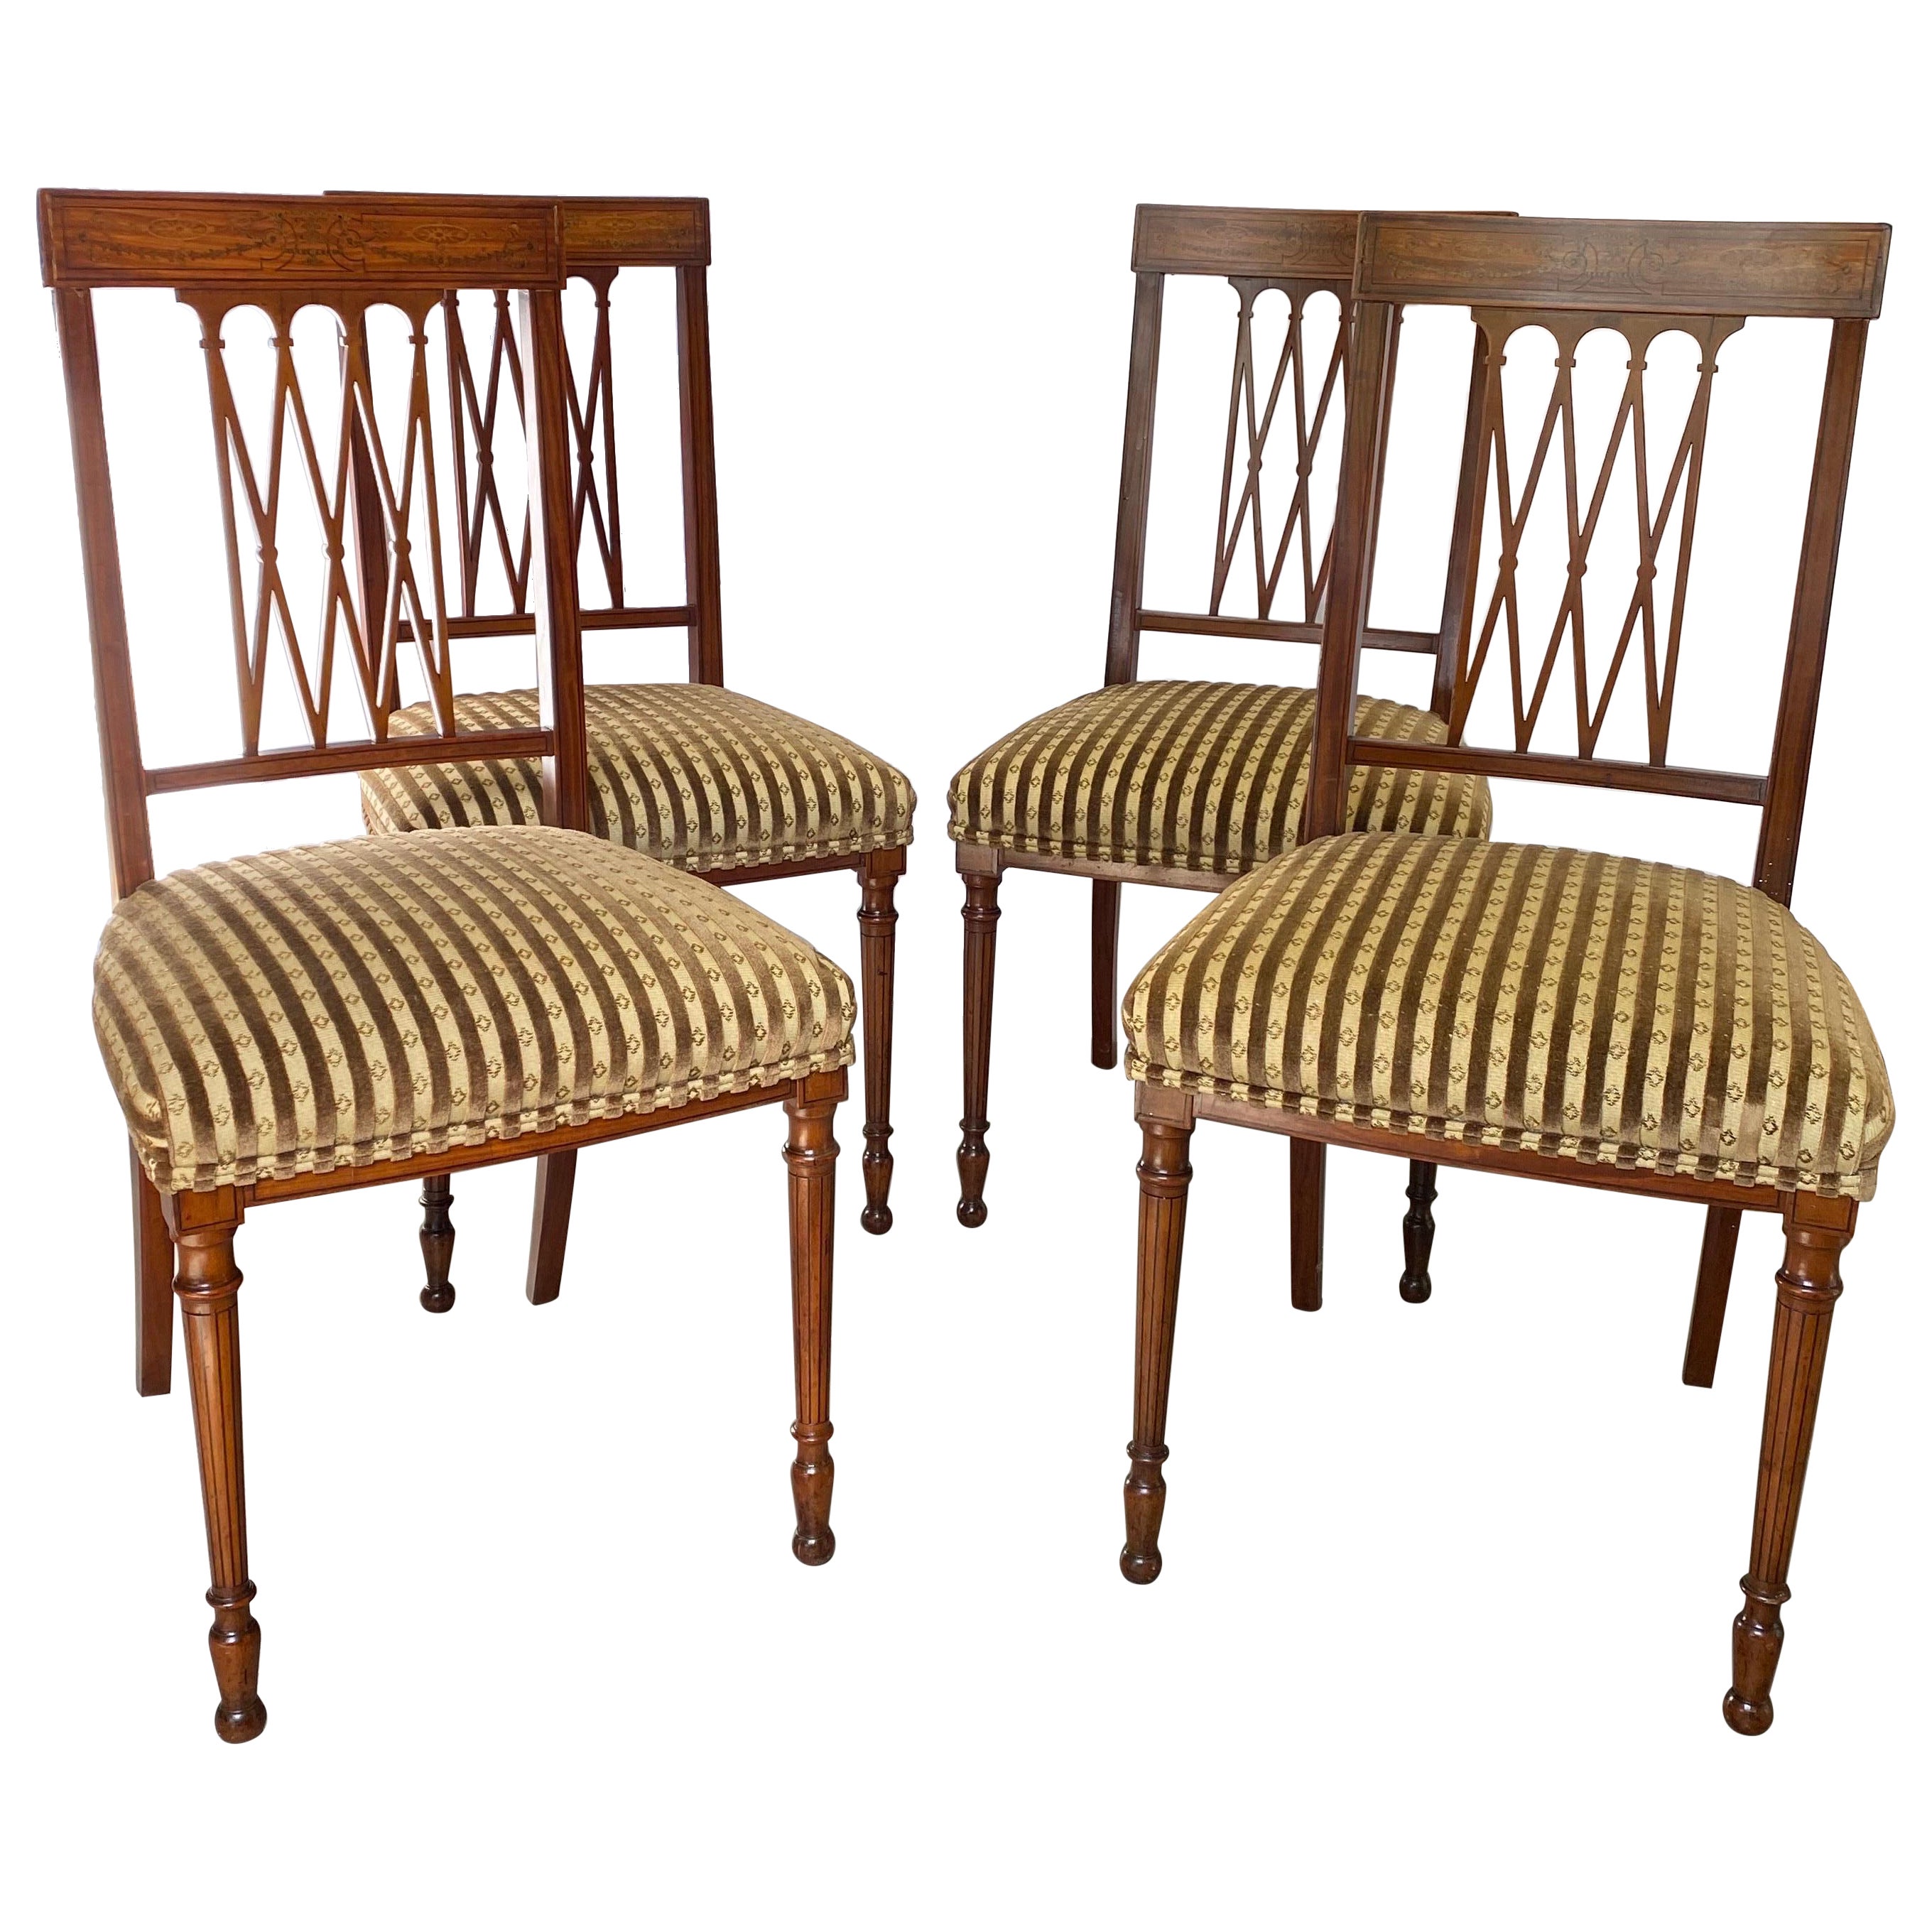 A Set of Four Antique Edwardian Inlaid Side Chairs  For Sale